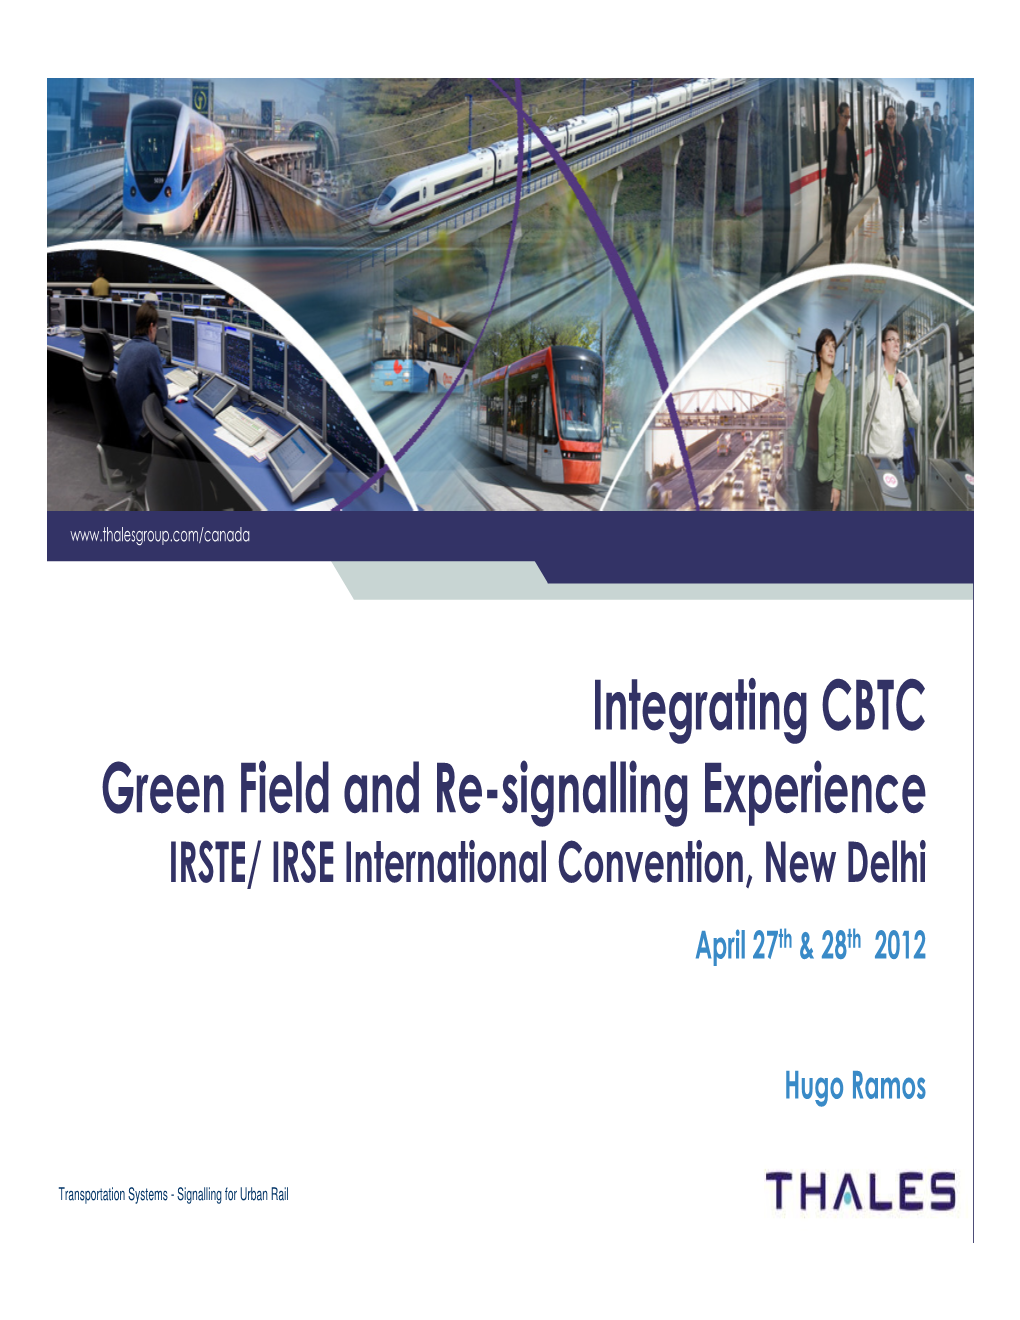 Integrating CBTC Green Field and Re-Signalling Experience IRSTE/ IRSE International Convention, New Delhi April 27 Th & 28 Th 2012